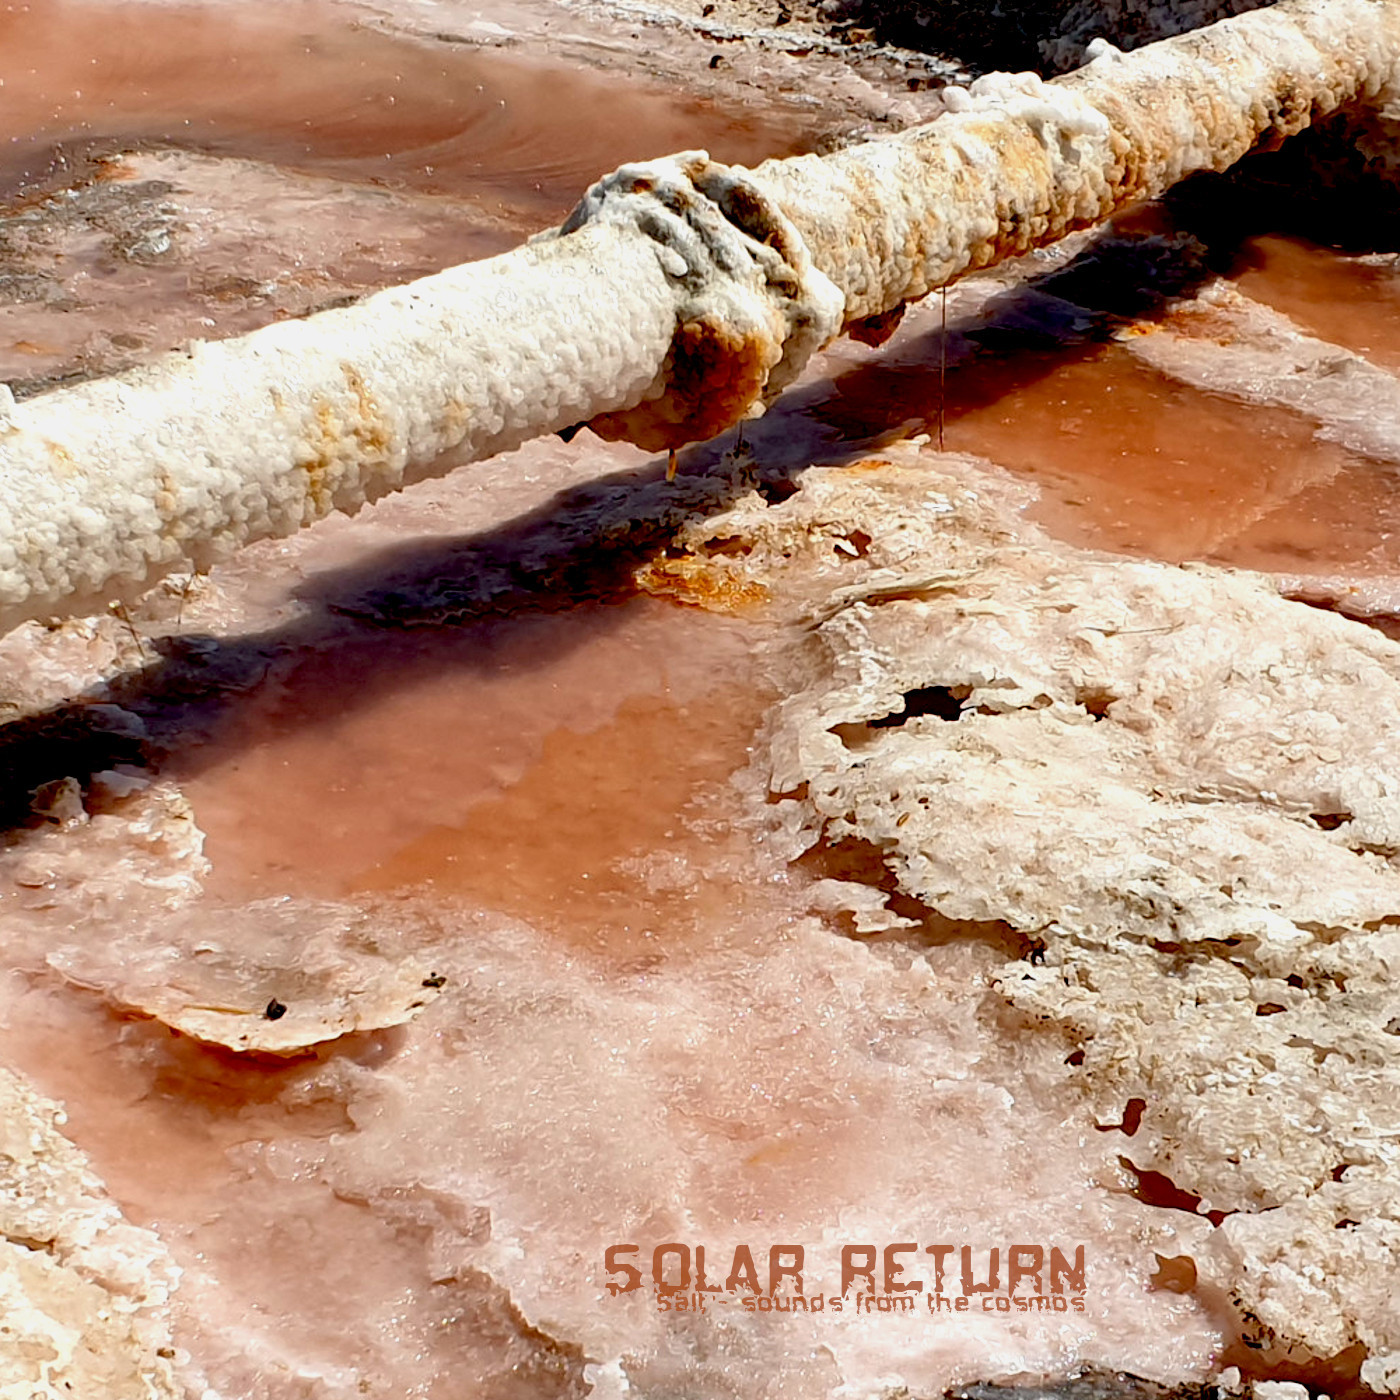 Solar Return – New Release – SALT – Sounds from the cosmos